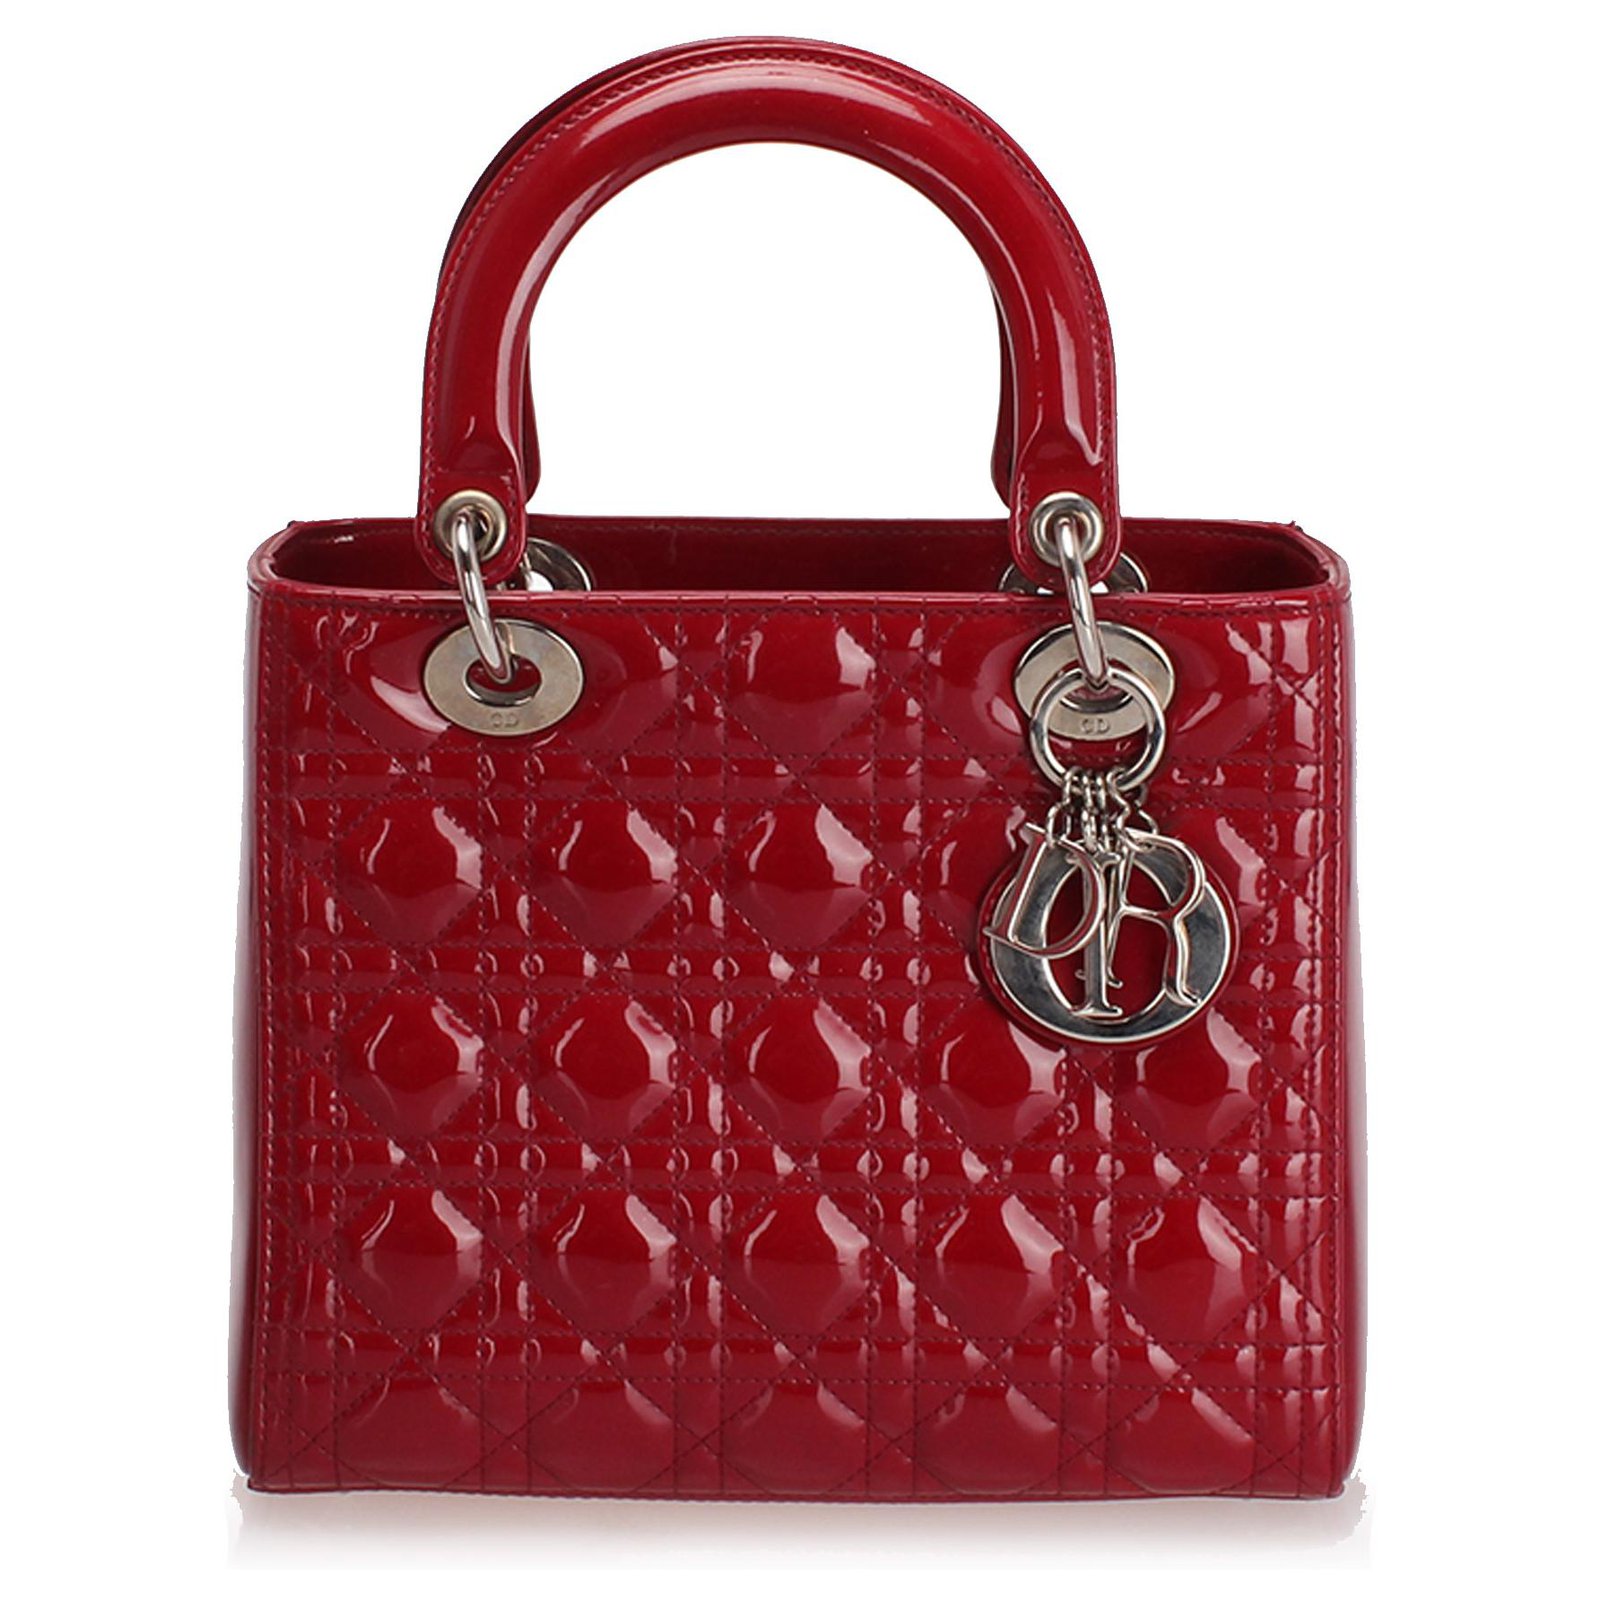 lady dior red